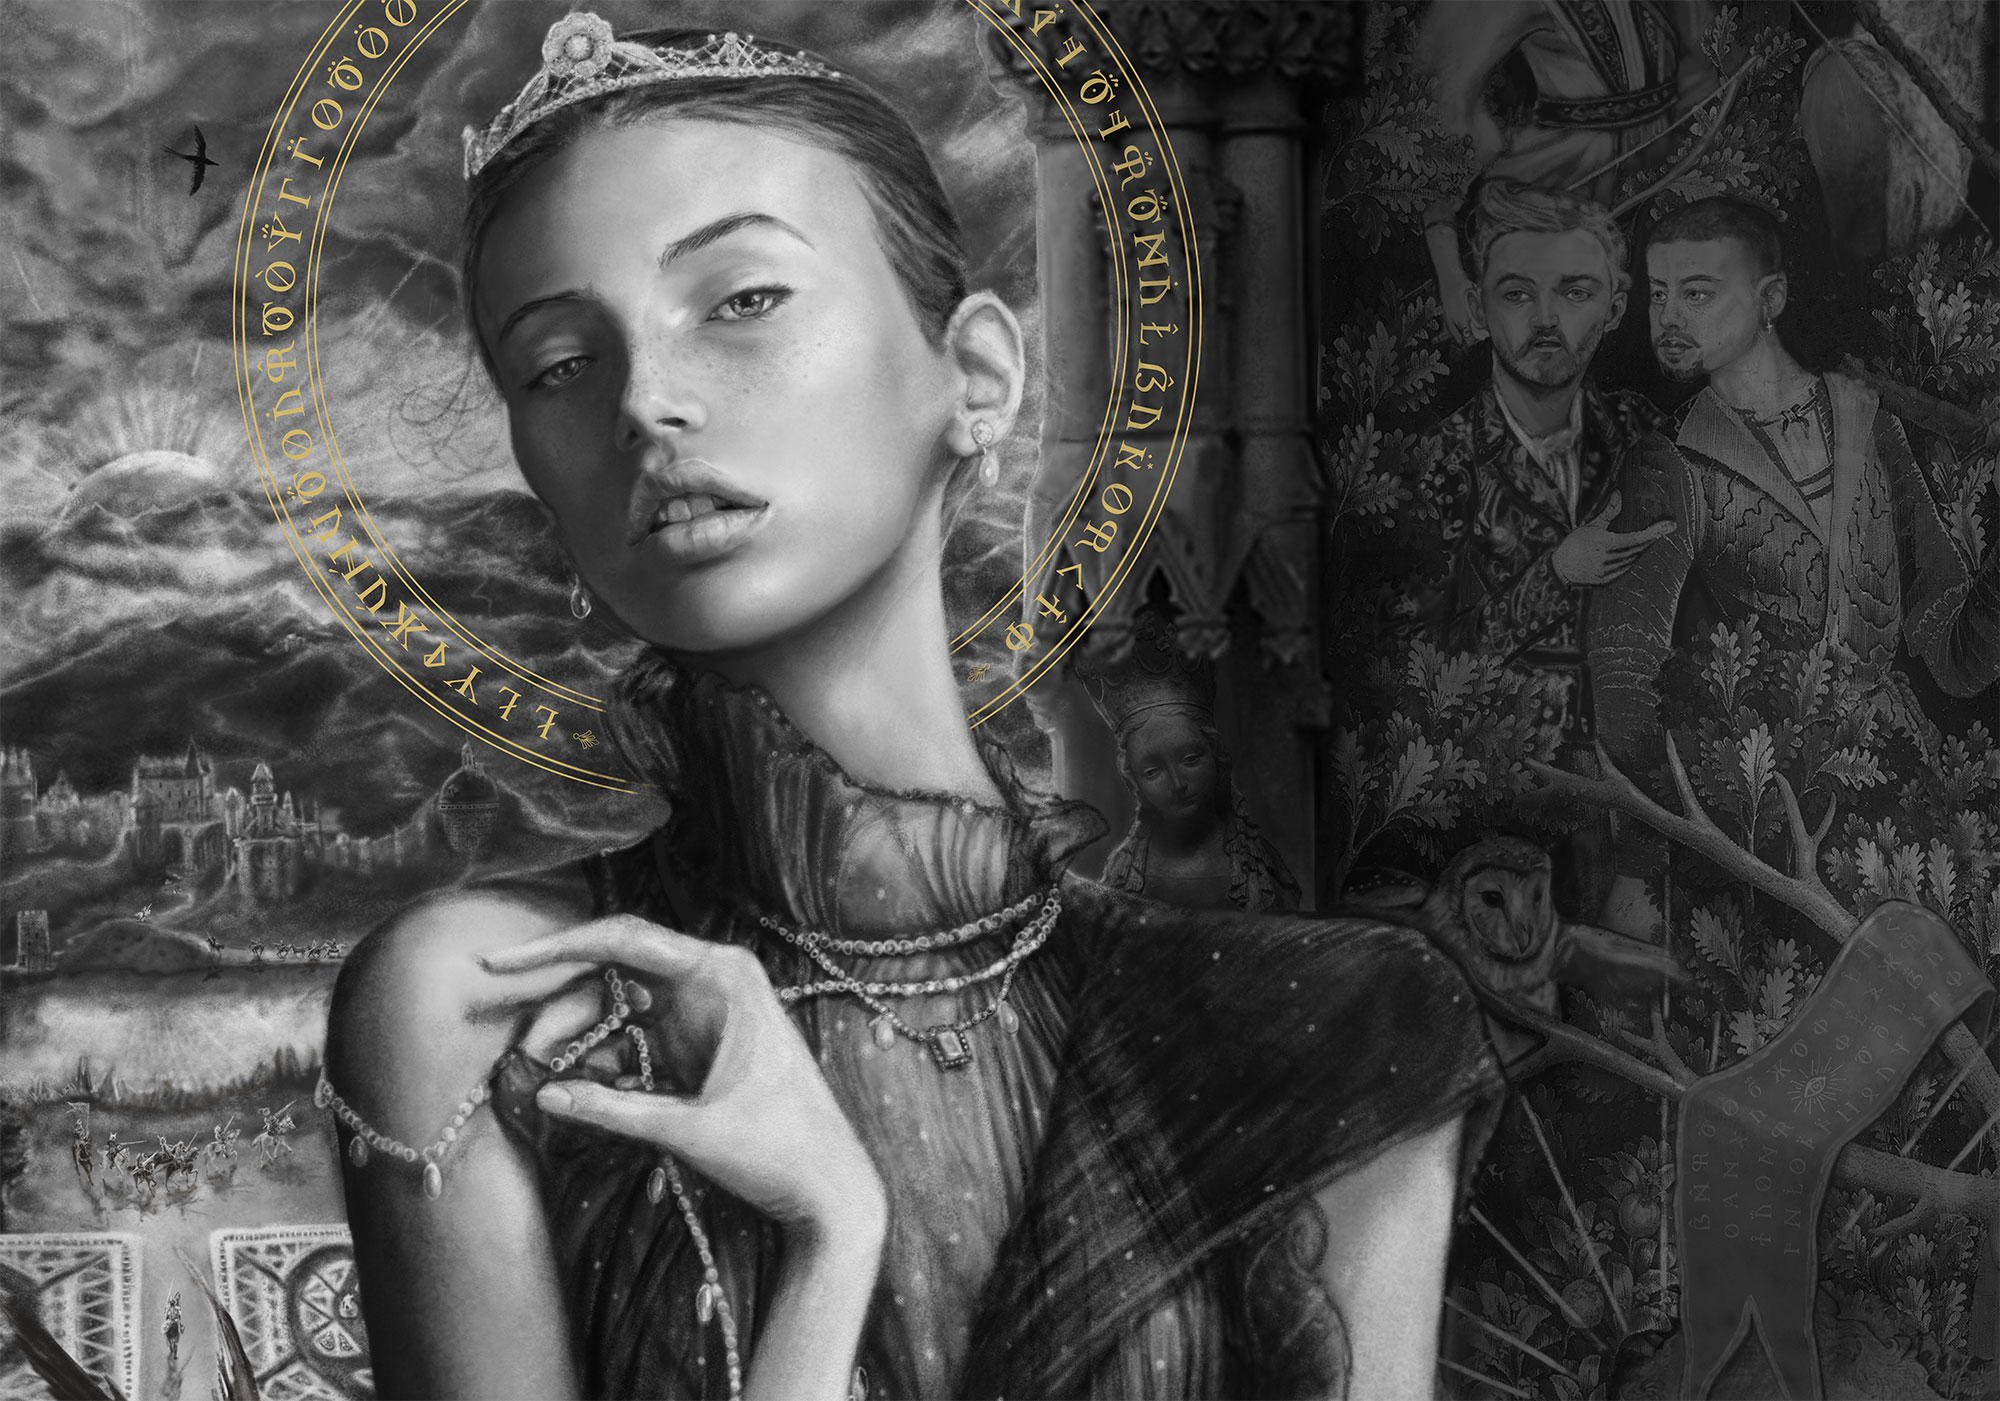 A close up details picture of swedish model mona johannesson wearing a crown and of  a tapestry featuring simon ungless, alexander mcqueen and lily cole by artist Danny Roberts  black and white digital concept sketch